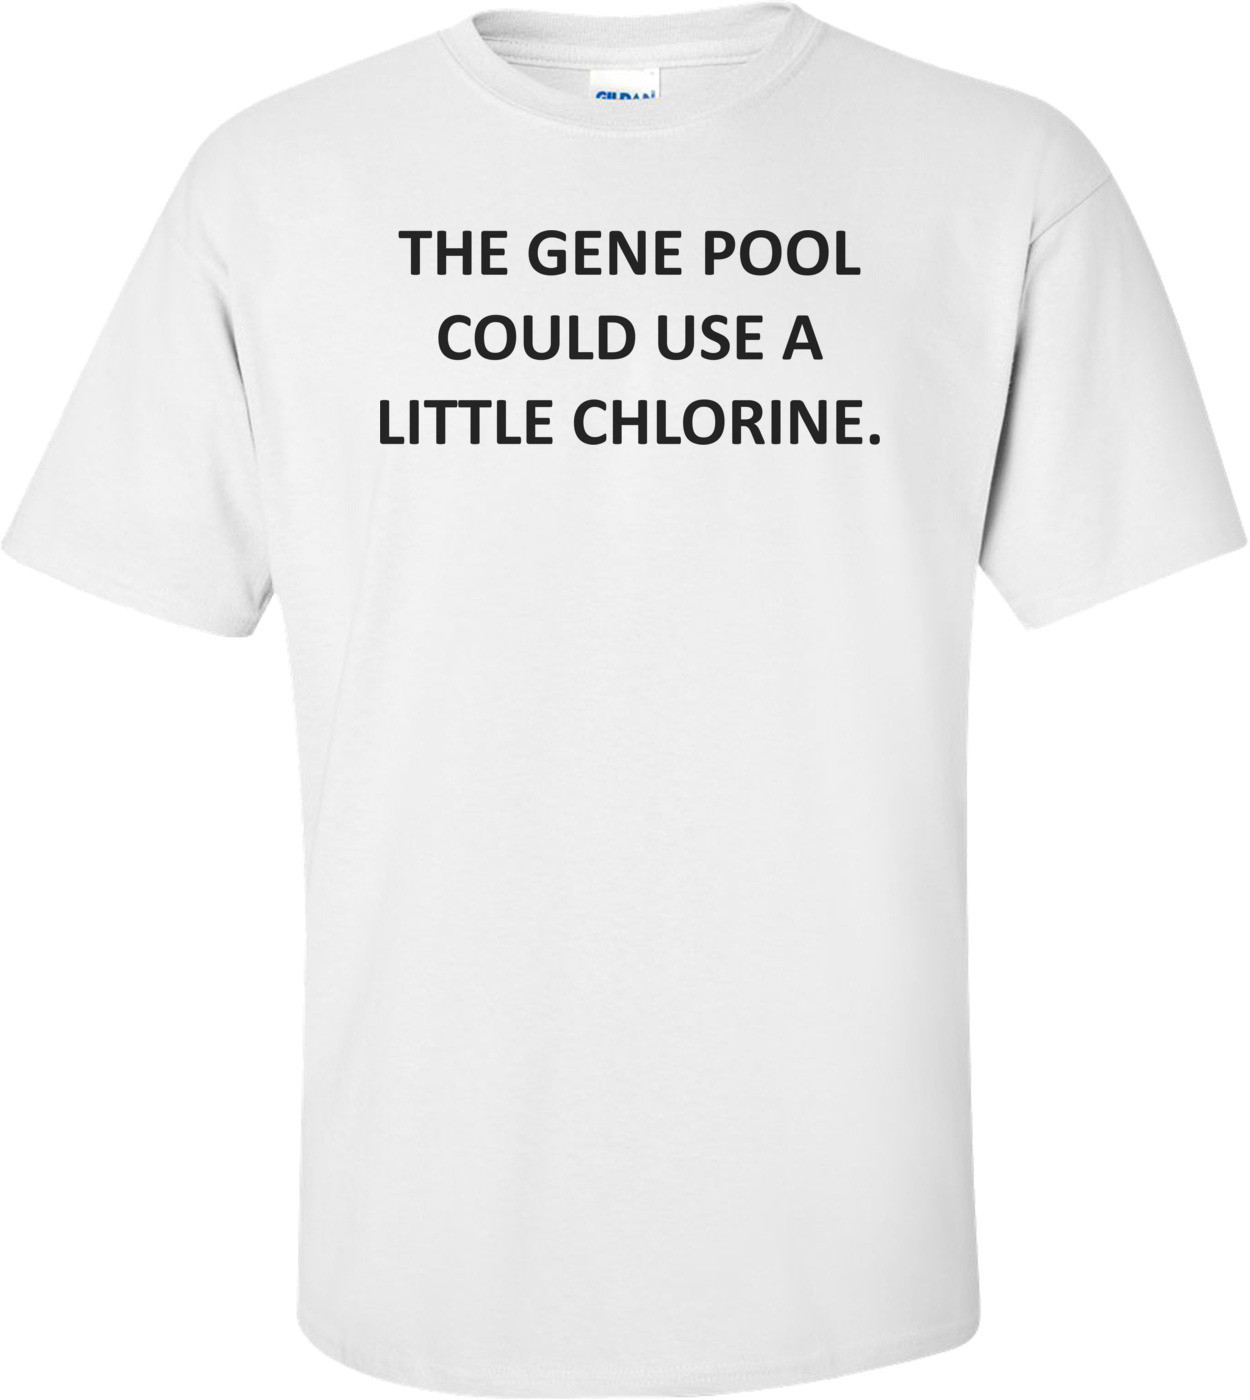 THE GENE POOL COULD USE A LITTLE CHLORINE. Shirt